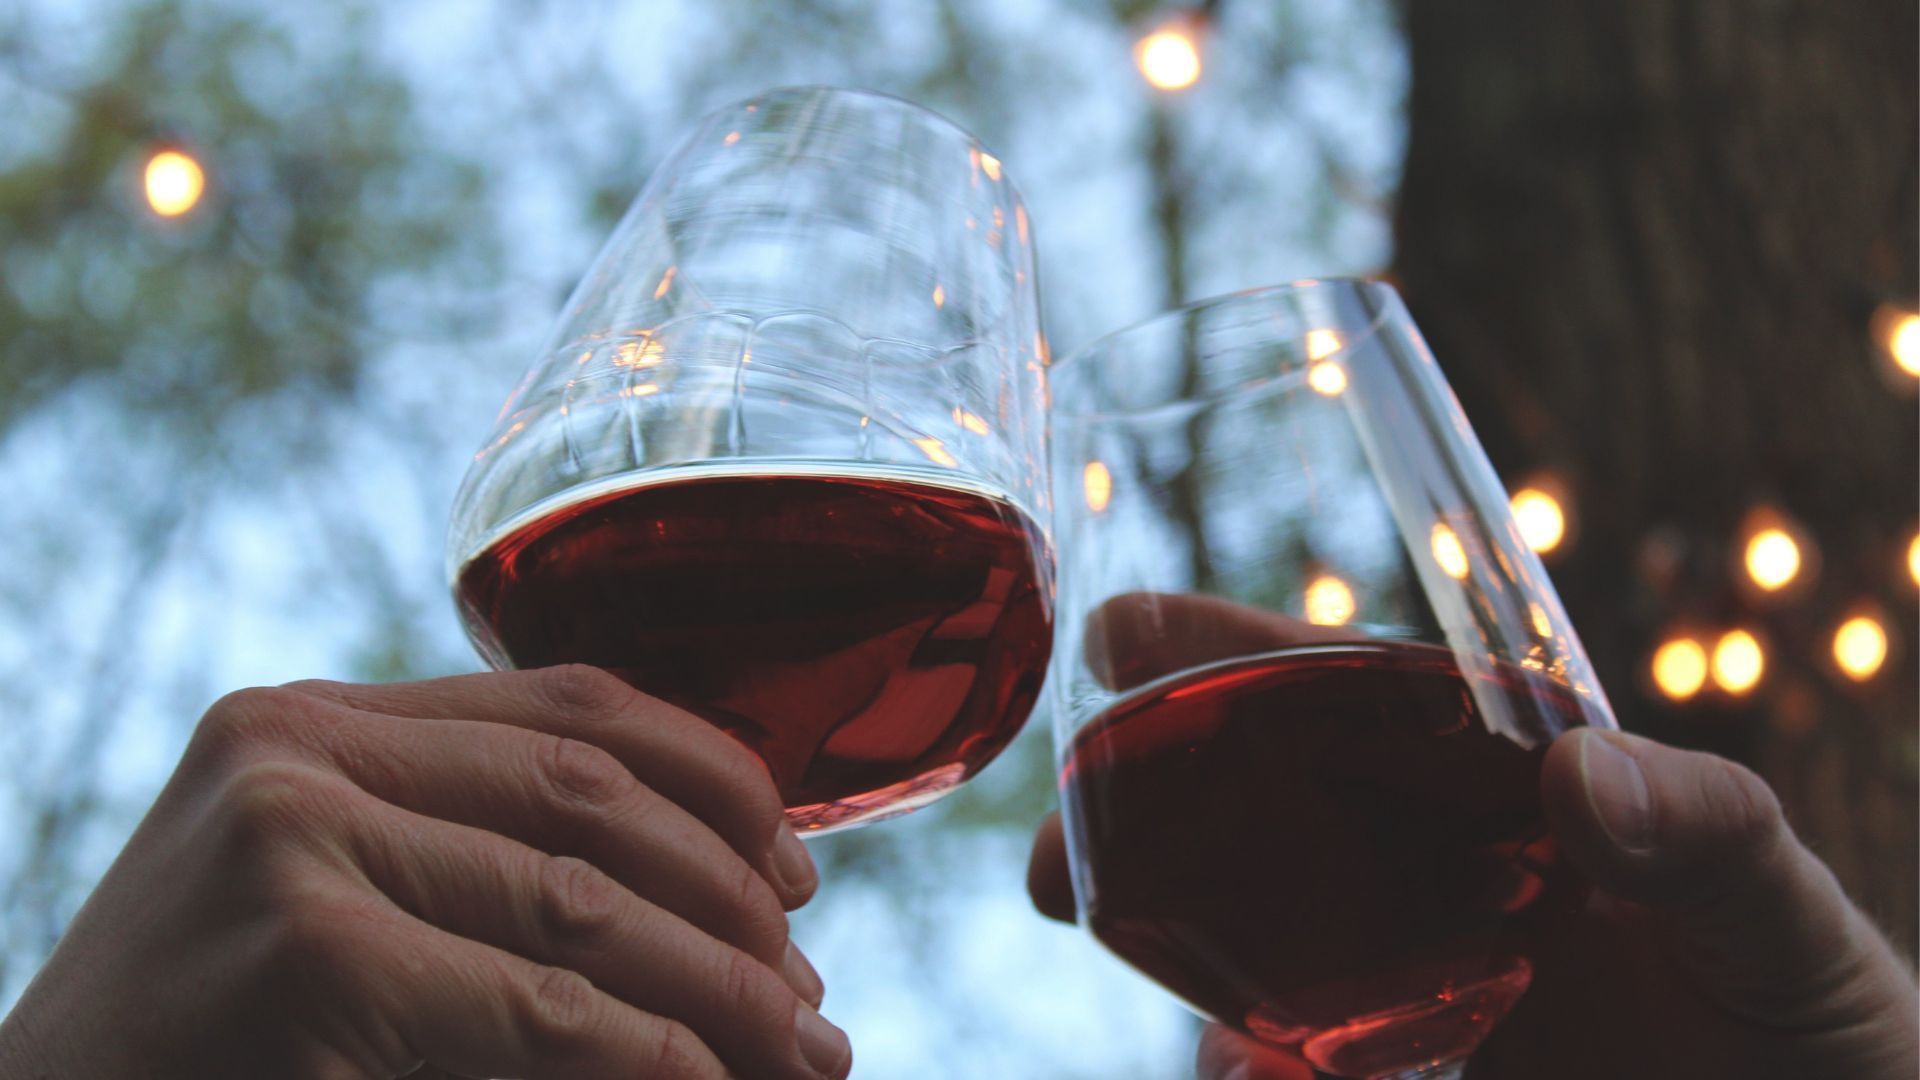 Red wine's health benefits: Why a glass a day keeps doctors away